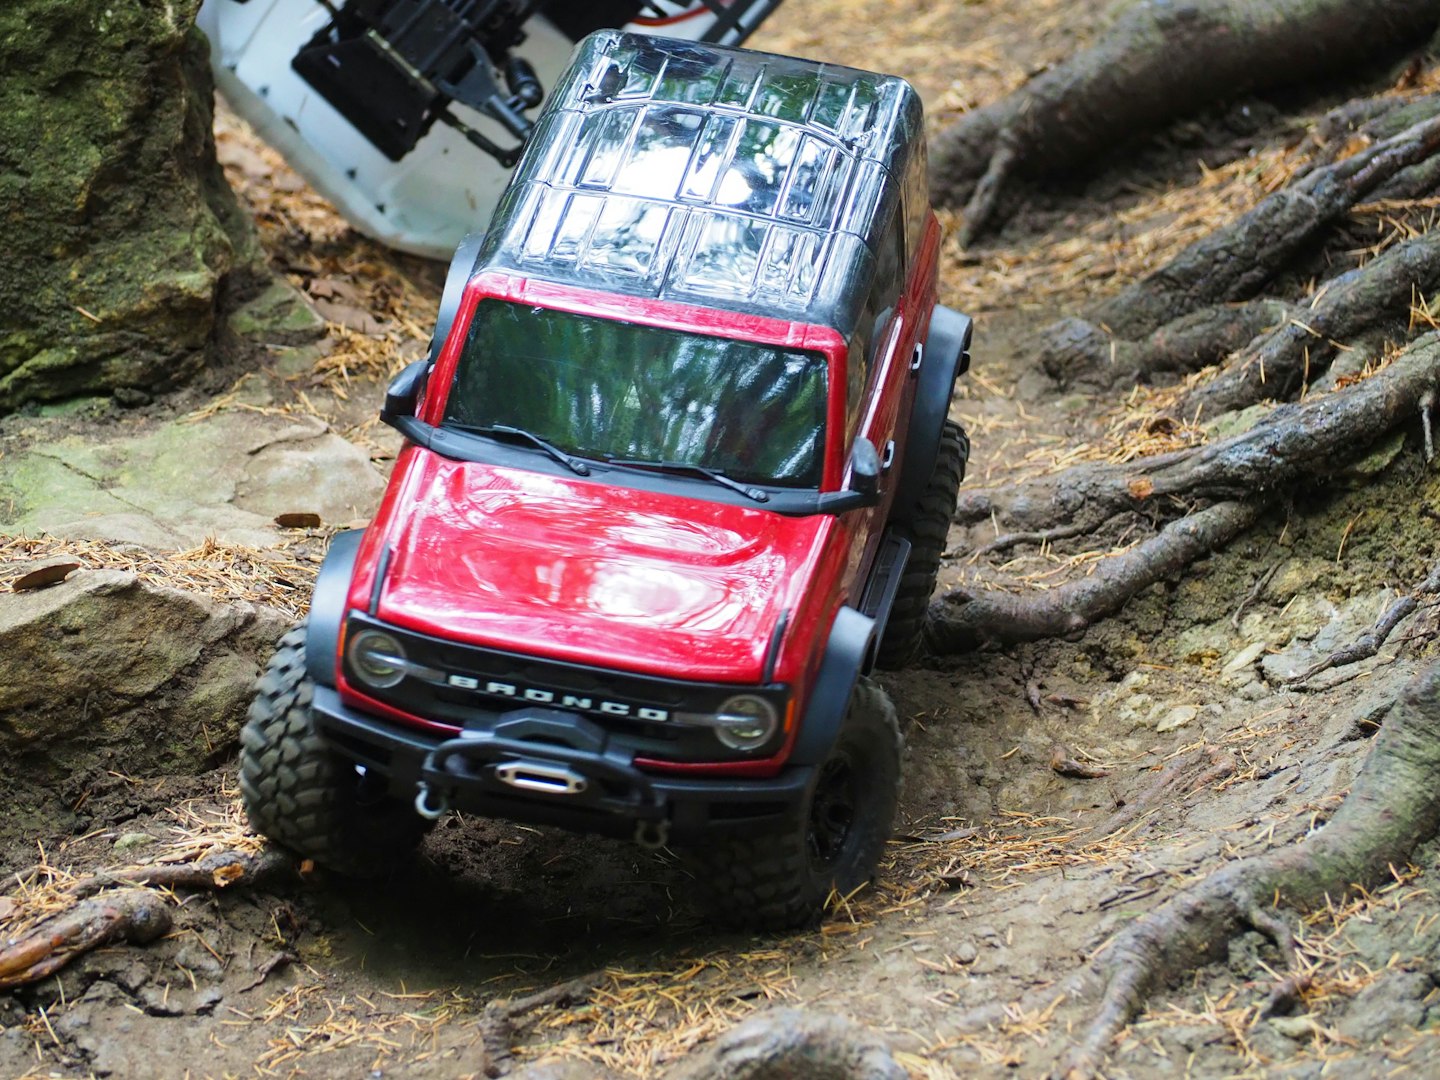 Traxxas Bronco going down a hill with Element Enduro rolling behind